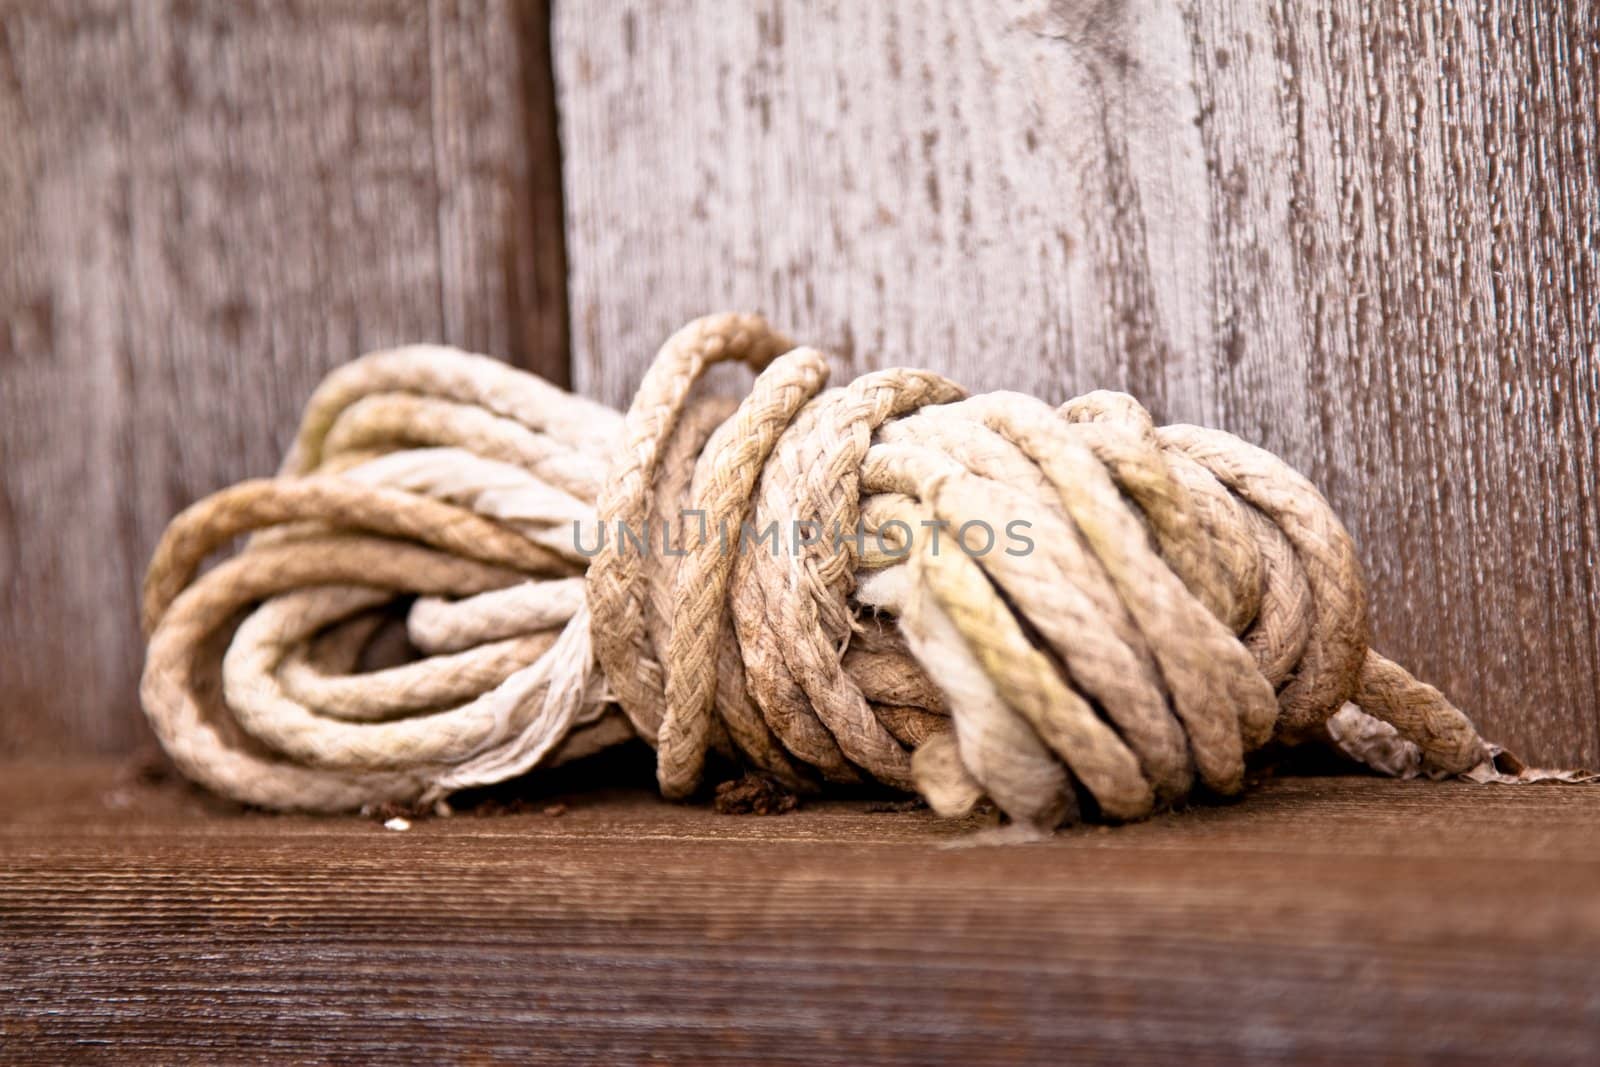 Ball of white twine cord on wooden ledge